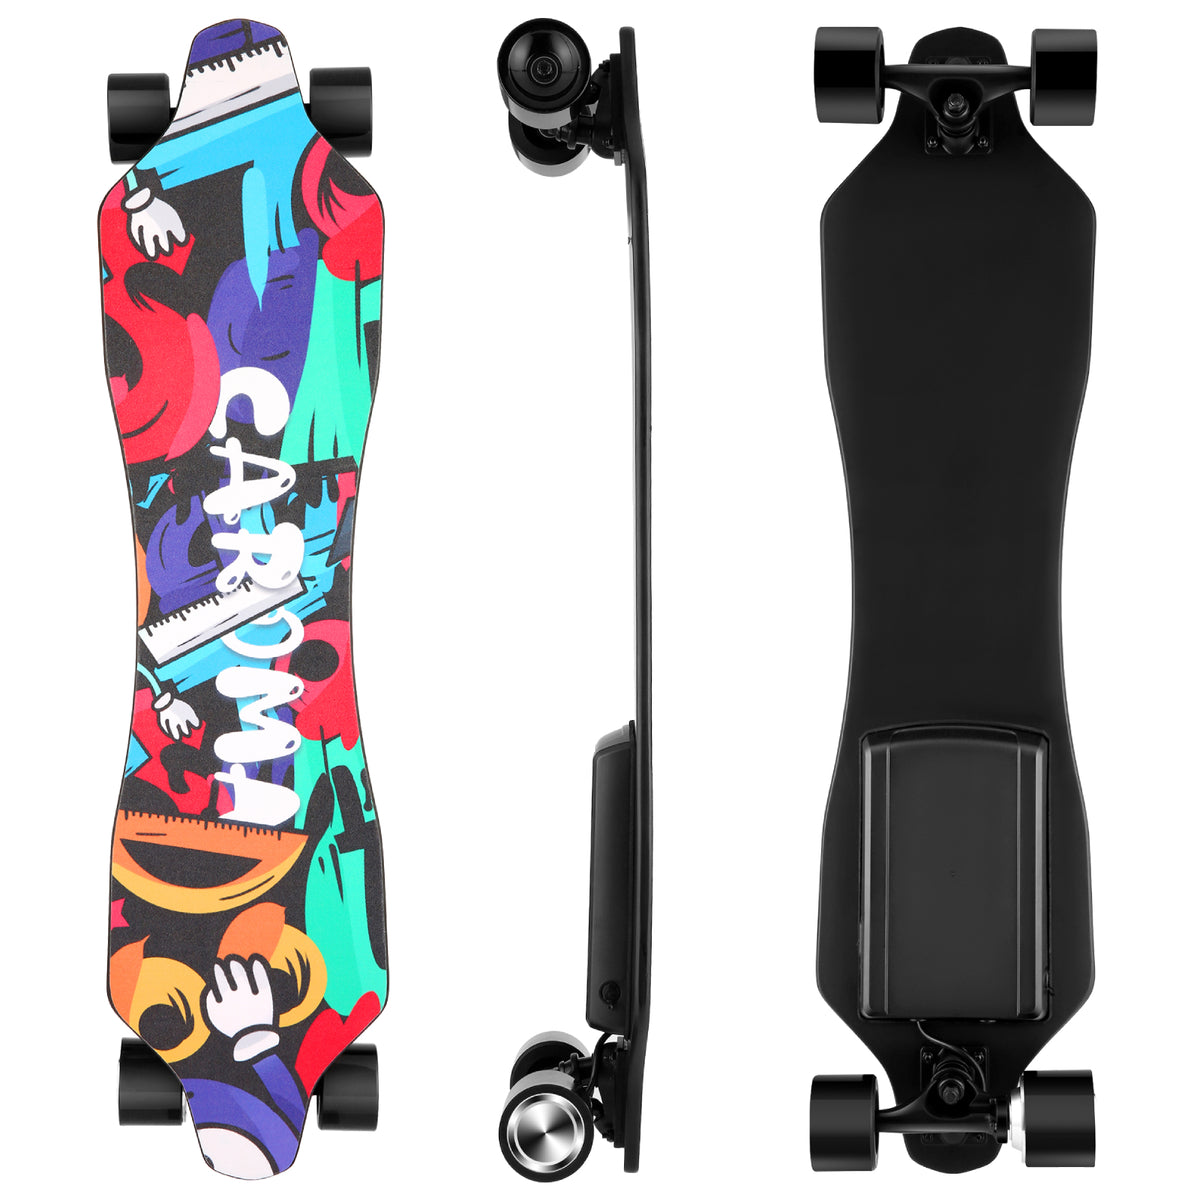 Caroma Electric Skateboards with Remote